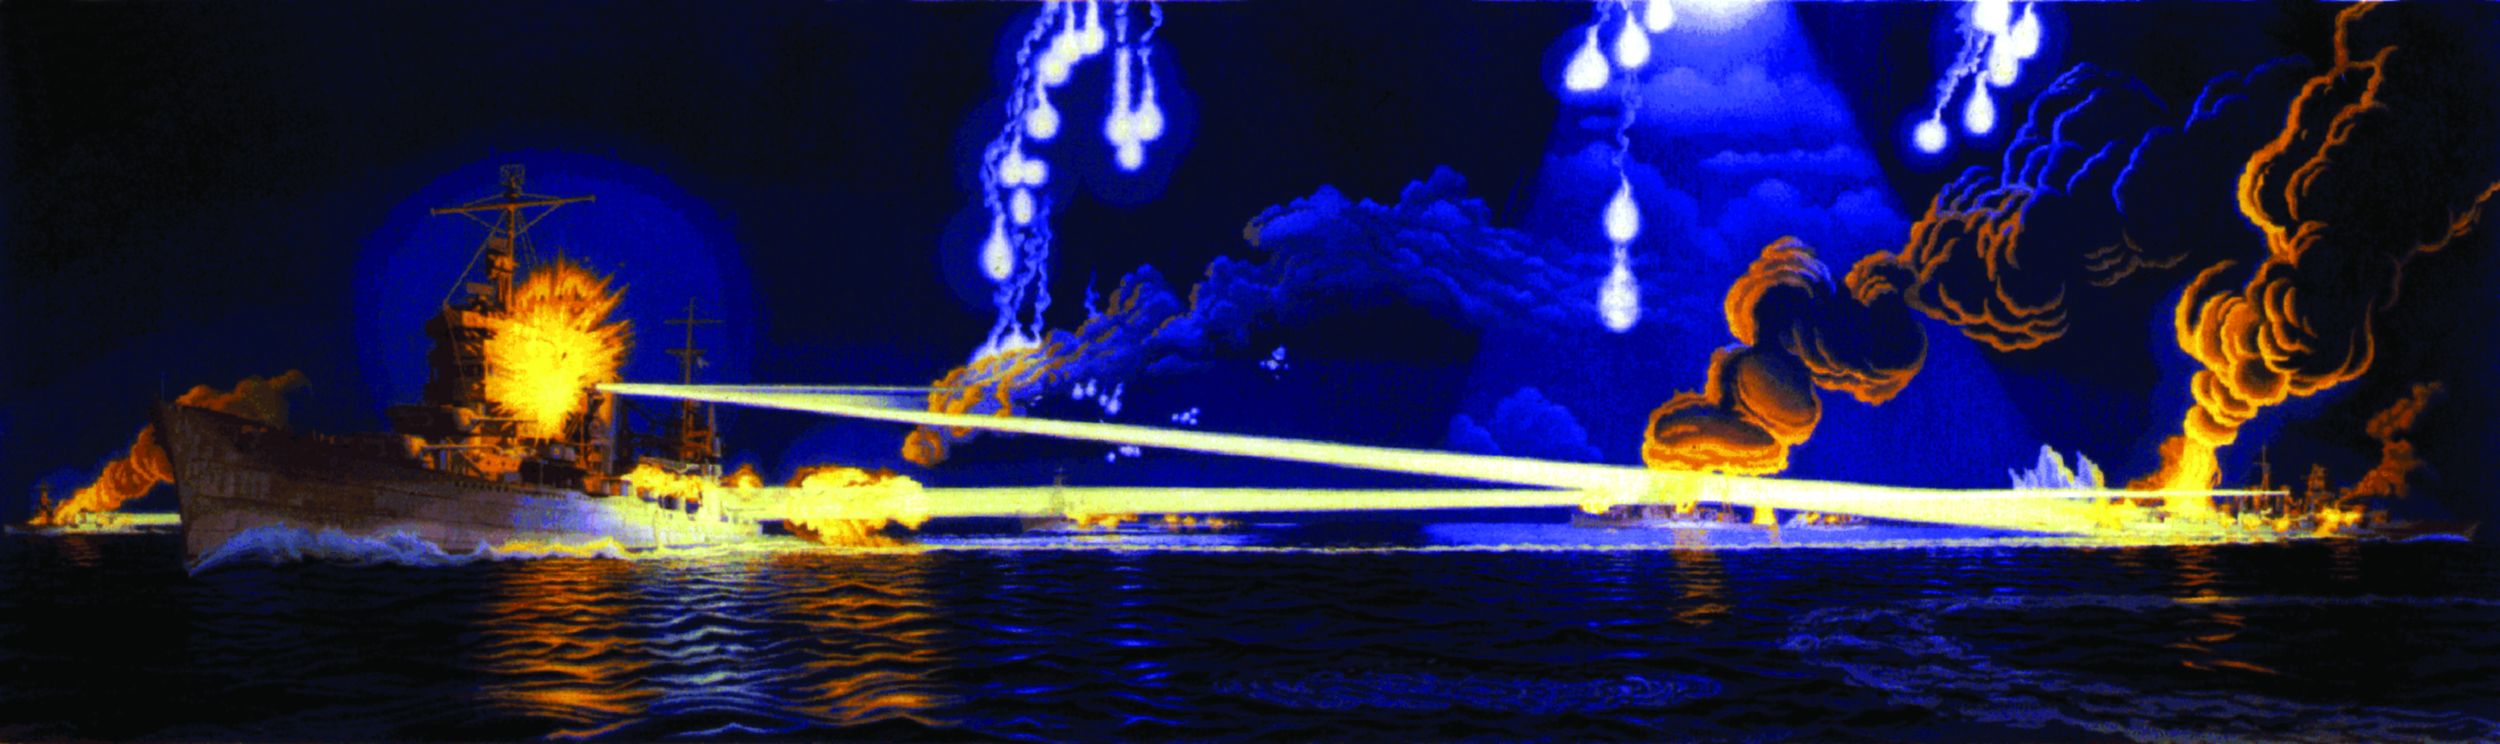 The November 13, 1942, naval battle of Guadalcanal took place at night, favoring the Japanese who were skilled in nocturnal warfare and employed their formidable Long Lance torpedo. In this painting, flares illuminate the sky and the beams of searchlights streak across the water. (U.S. Navy)